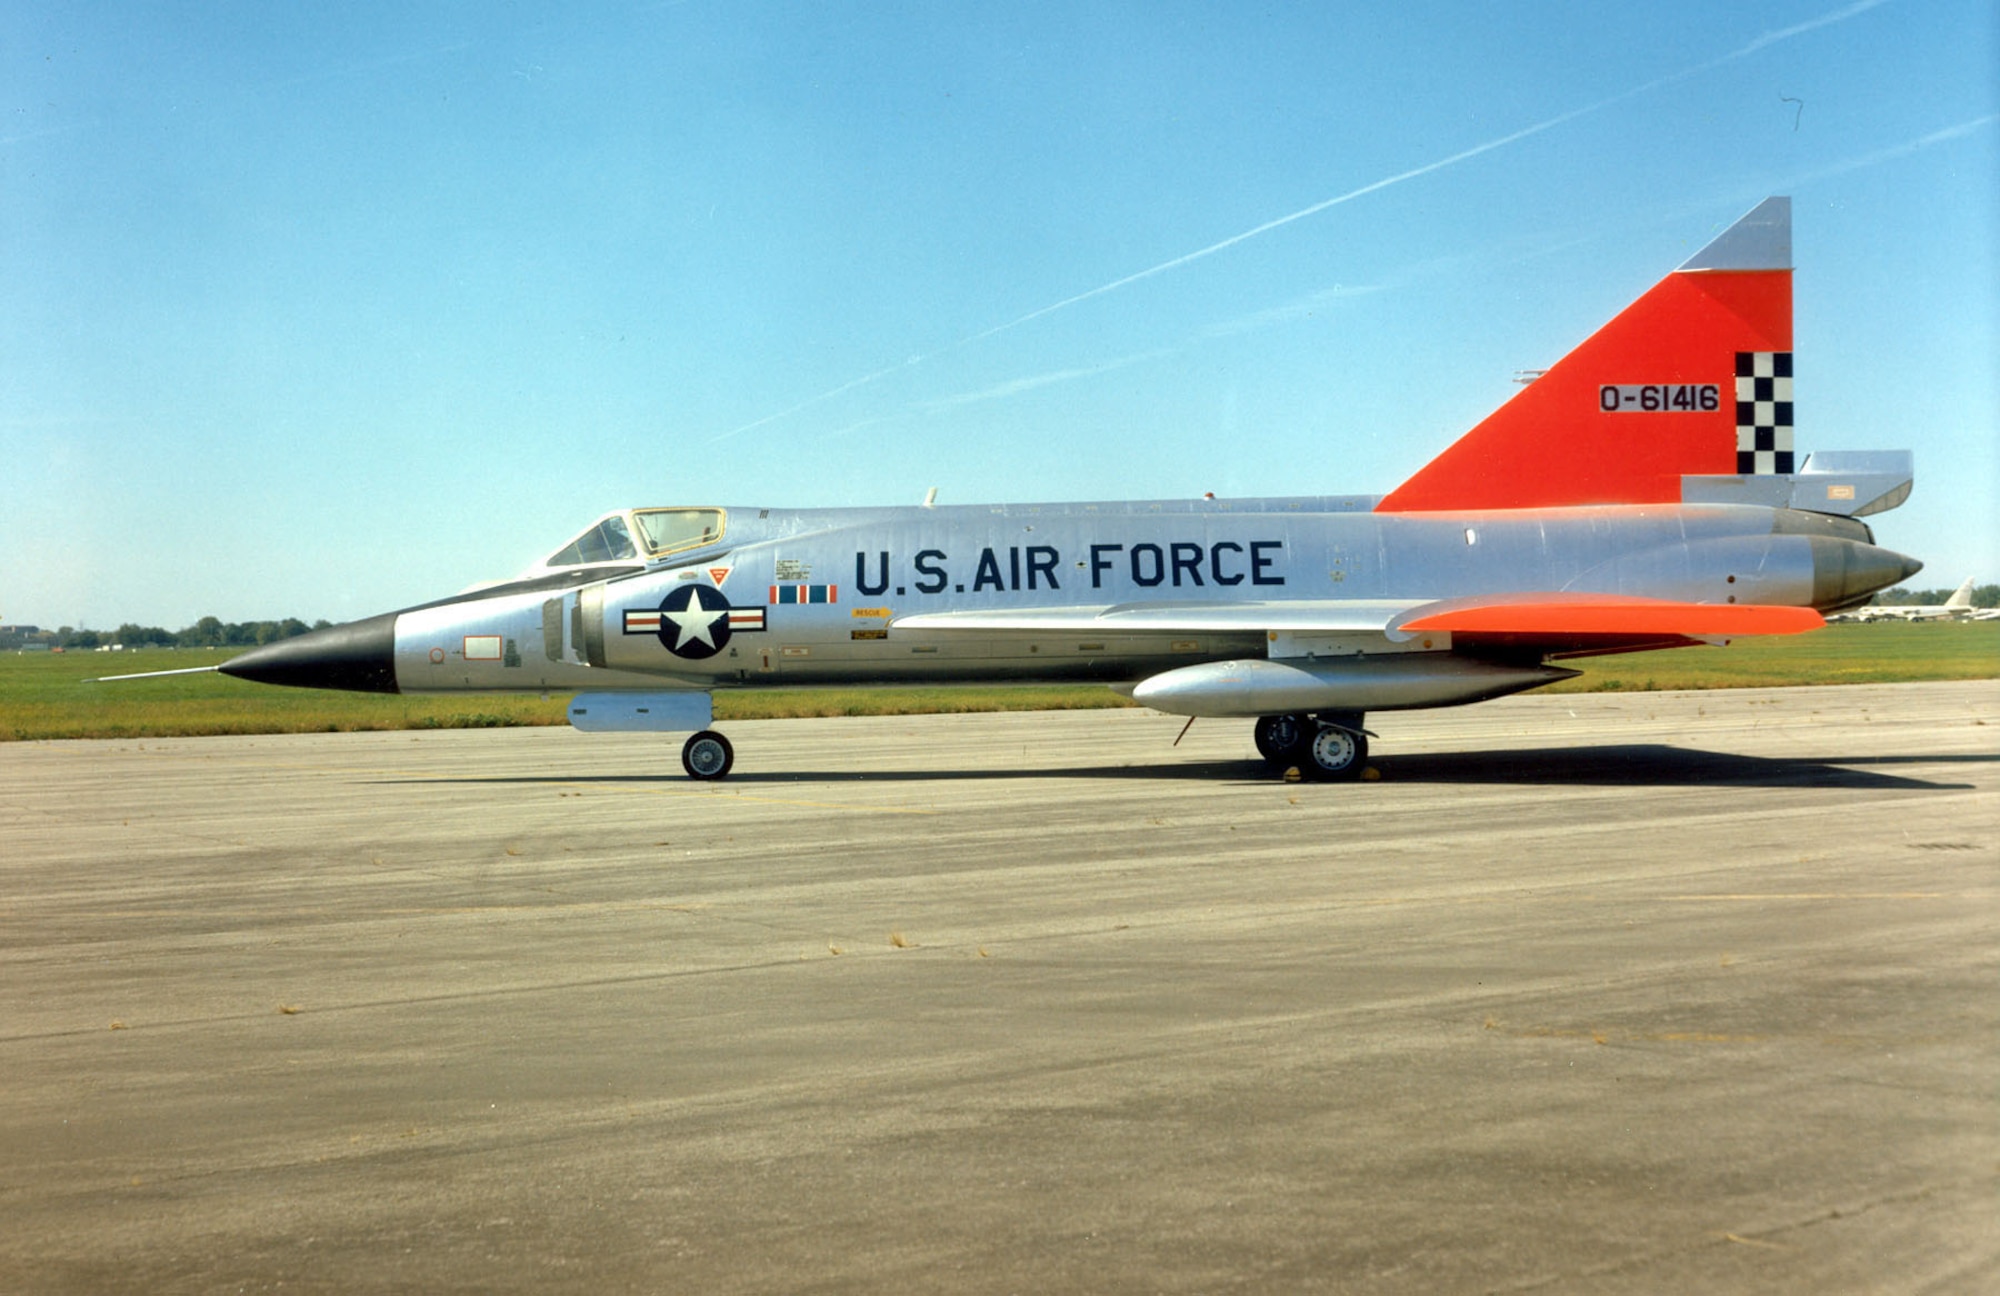 DAYTON, Ohio -- Convair F-102A Delta Dagger at the National Museum of the United States Air Force. (U.S. Air Force photo)